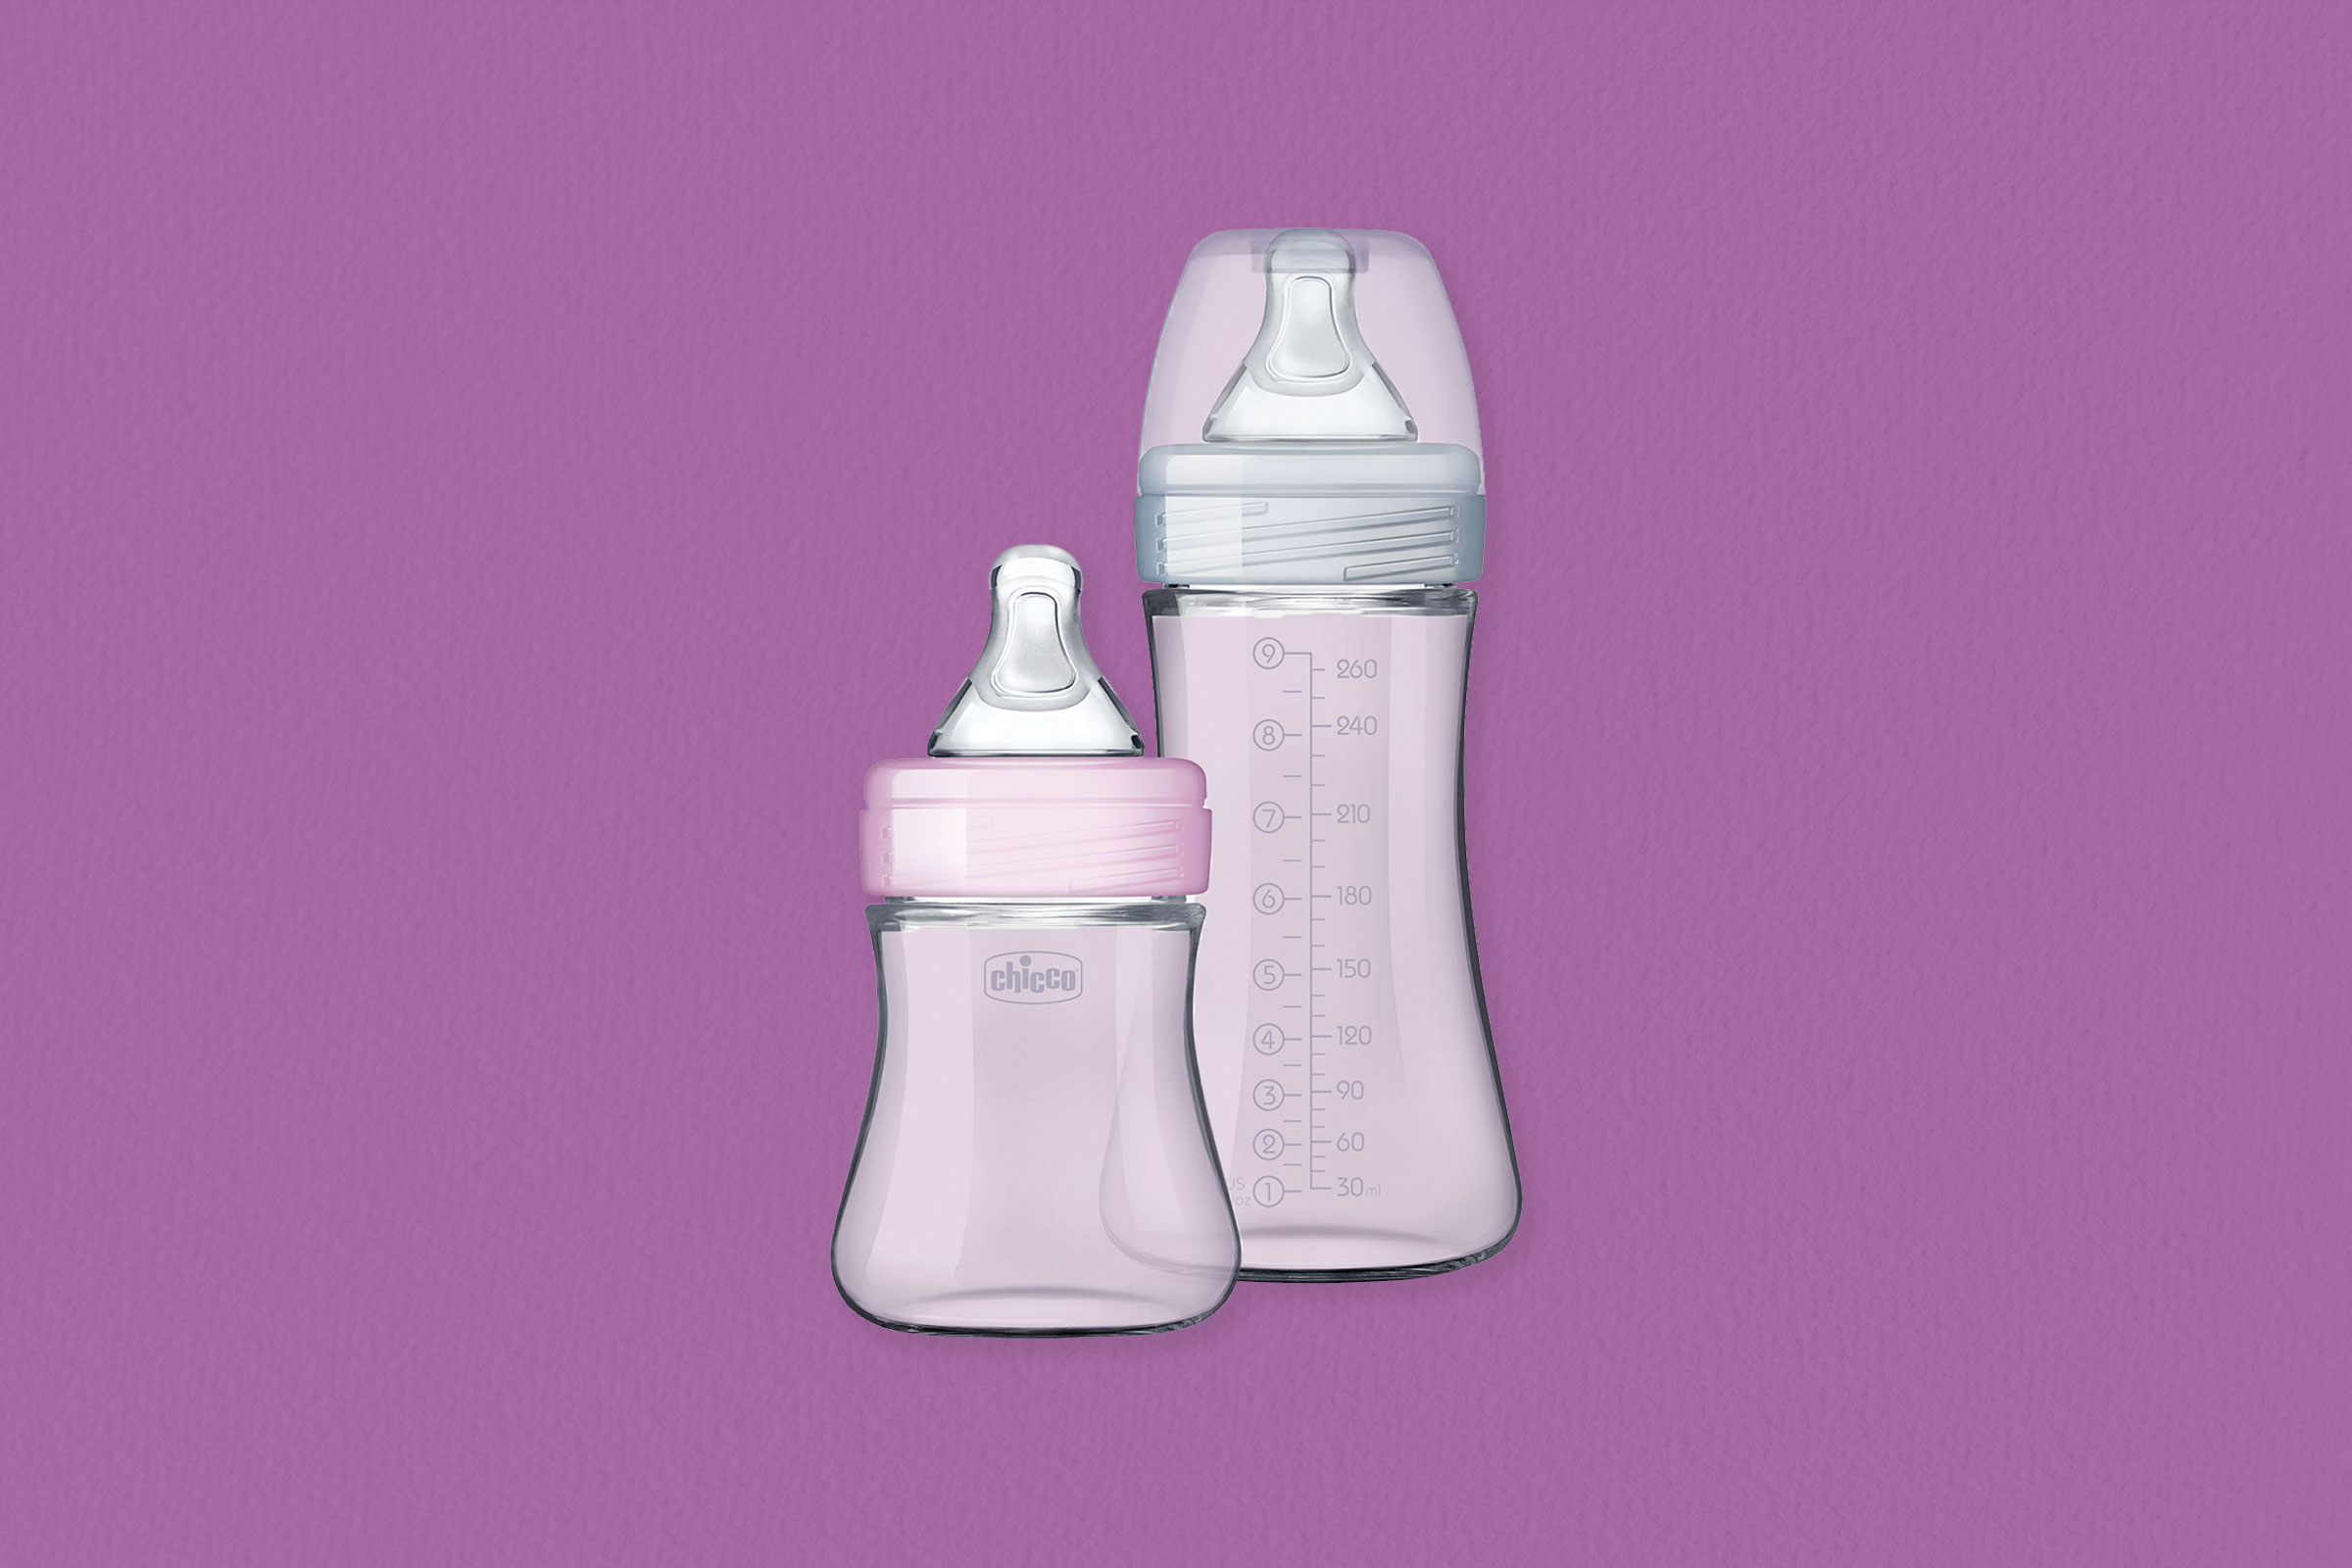 Best Inventions 2021: ChiccoDuo Hybrid Baby Bottle